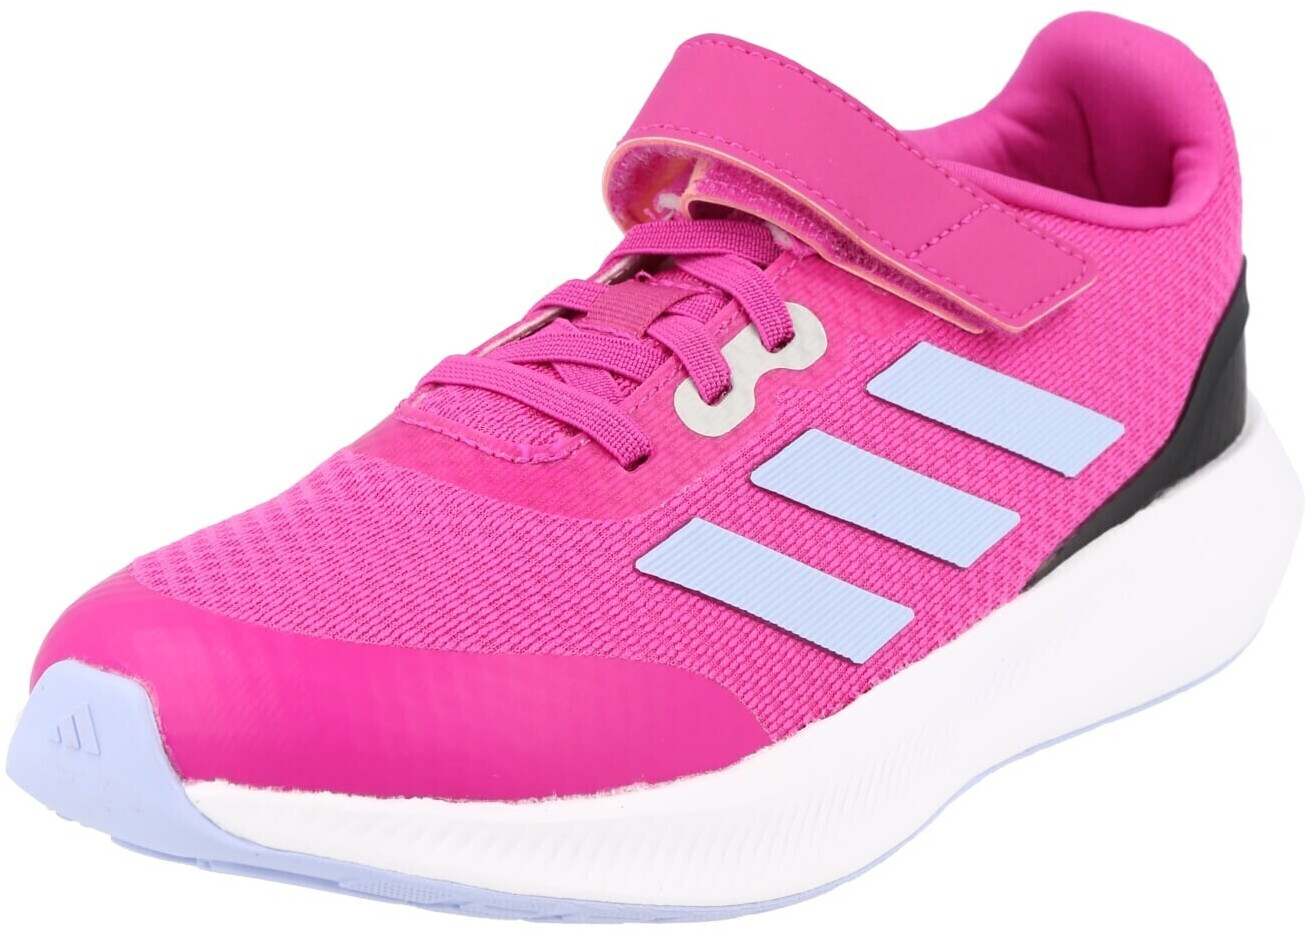 Buy Adidas Deals Elastic Black Fuchsia/Blue Dawn/Core Strap on (Today) Best Lace Kids Lucid Runfalcon £15.50 Top – from 3.0